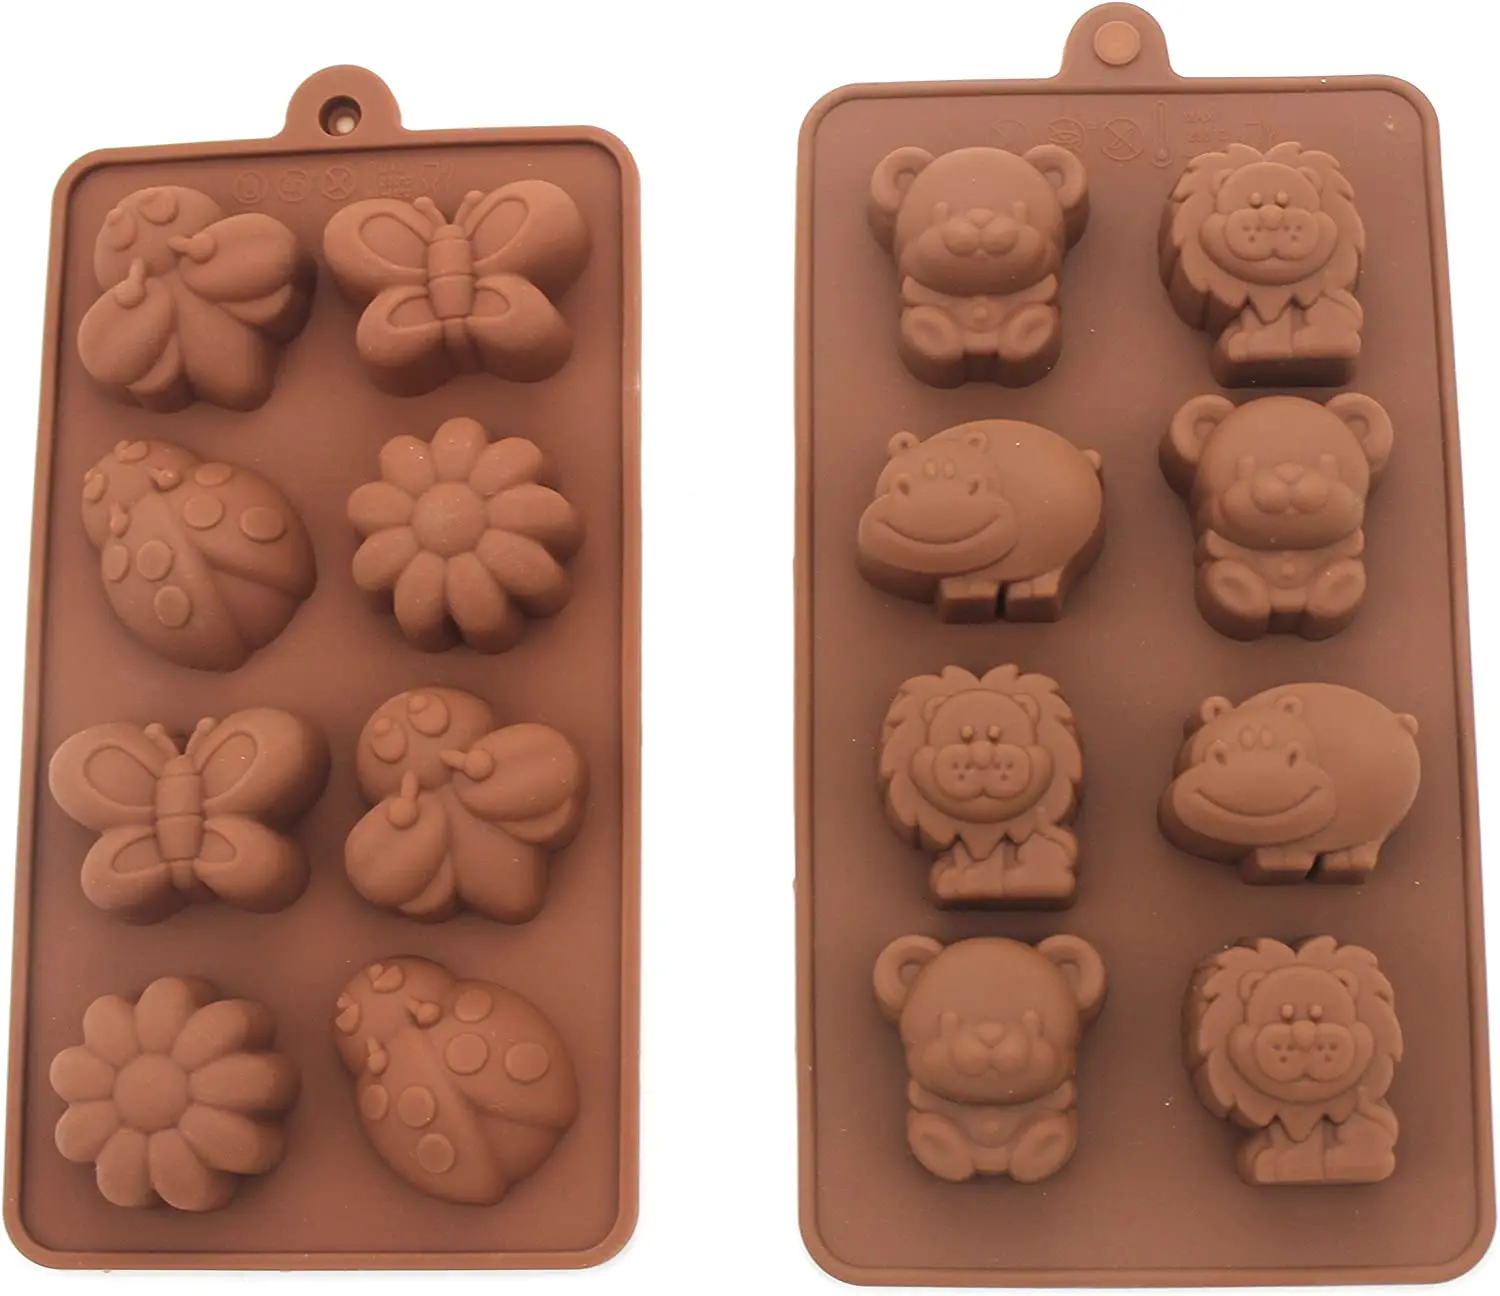 

2Pcs Silicone Chocolate Mold,Vehicles And Animal Shapes Mold For Making Chocolate, Waffle, Candy, Cookies